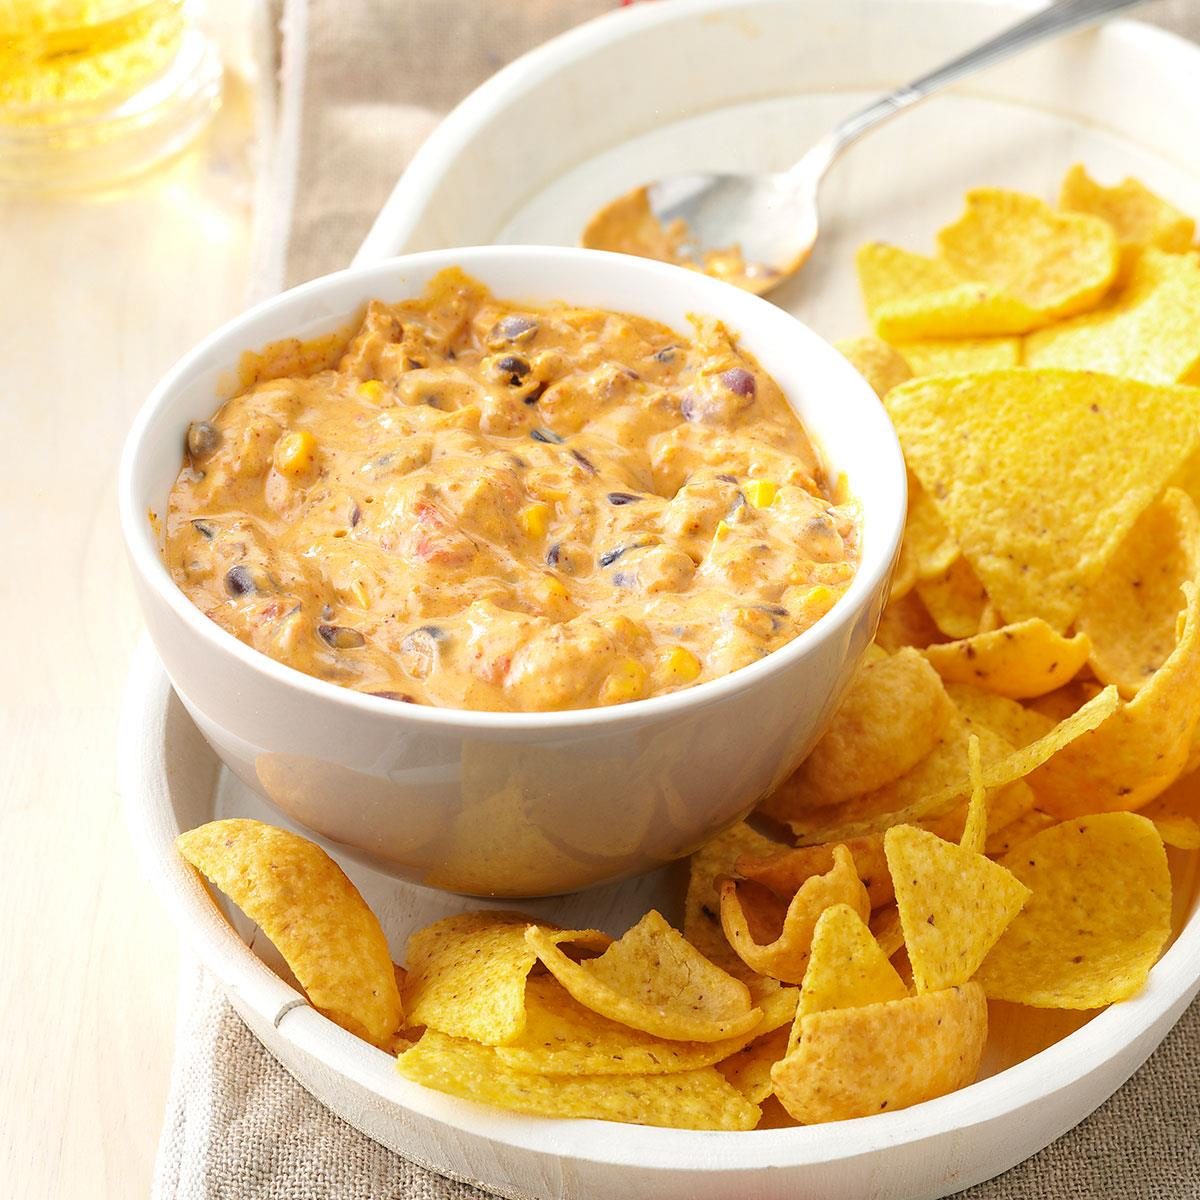 https://www.tasteofhome.com/wp-content/uploads/2018/01/Corn-Chip-Chili-Cheese-Dip_exps45380_TH143193B04_10_6b_RMS-7.jpg?fit=700%2C1024